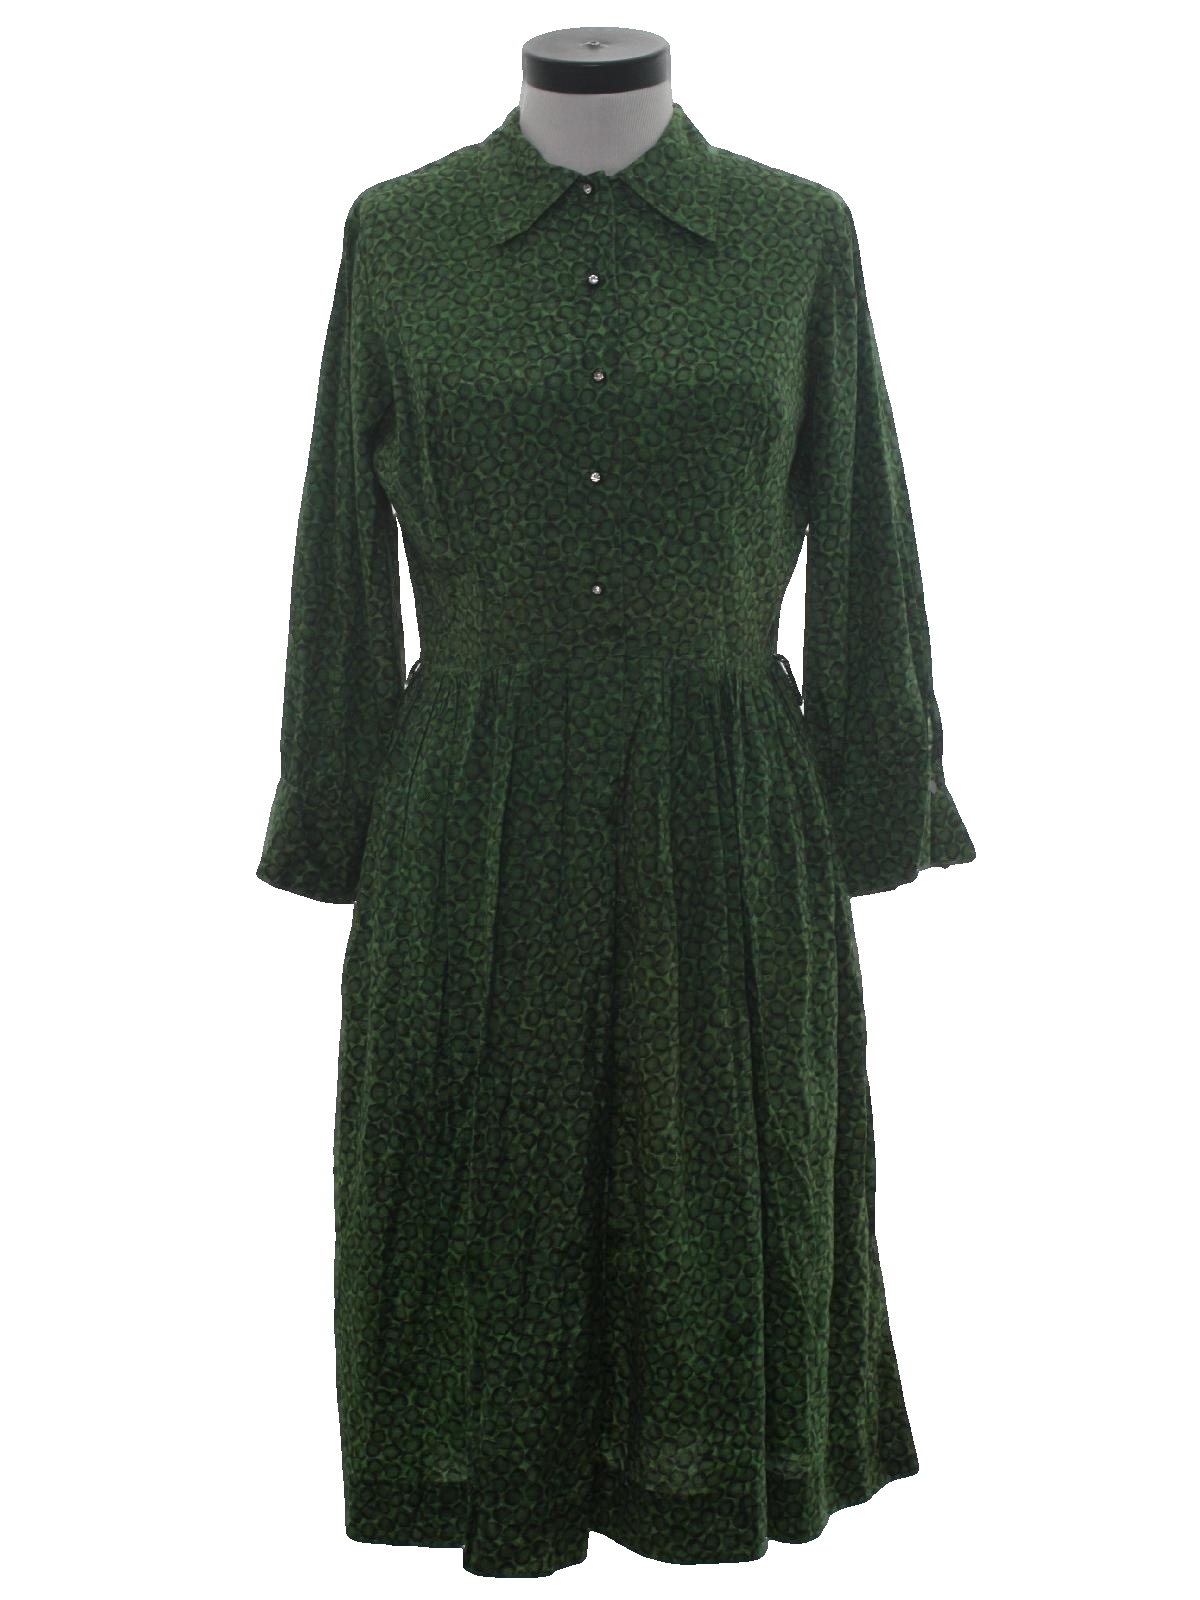 1950's Vintage Mode O Day Dress: Late 50s or Early 60s -Mode O Day ...